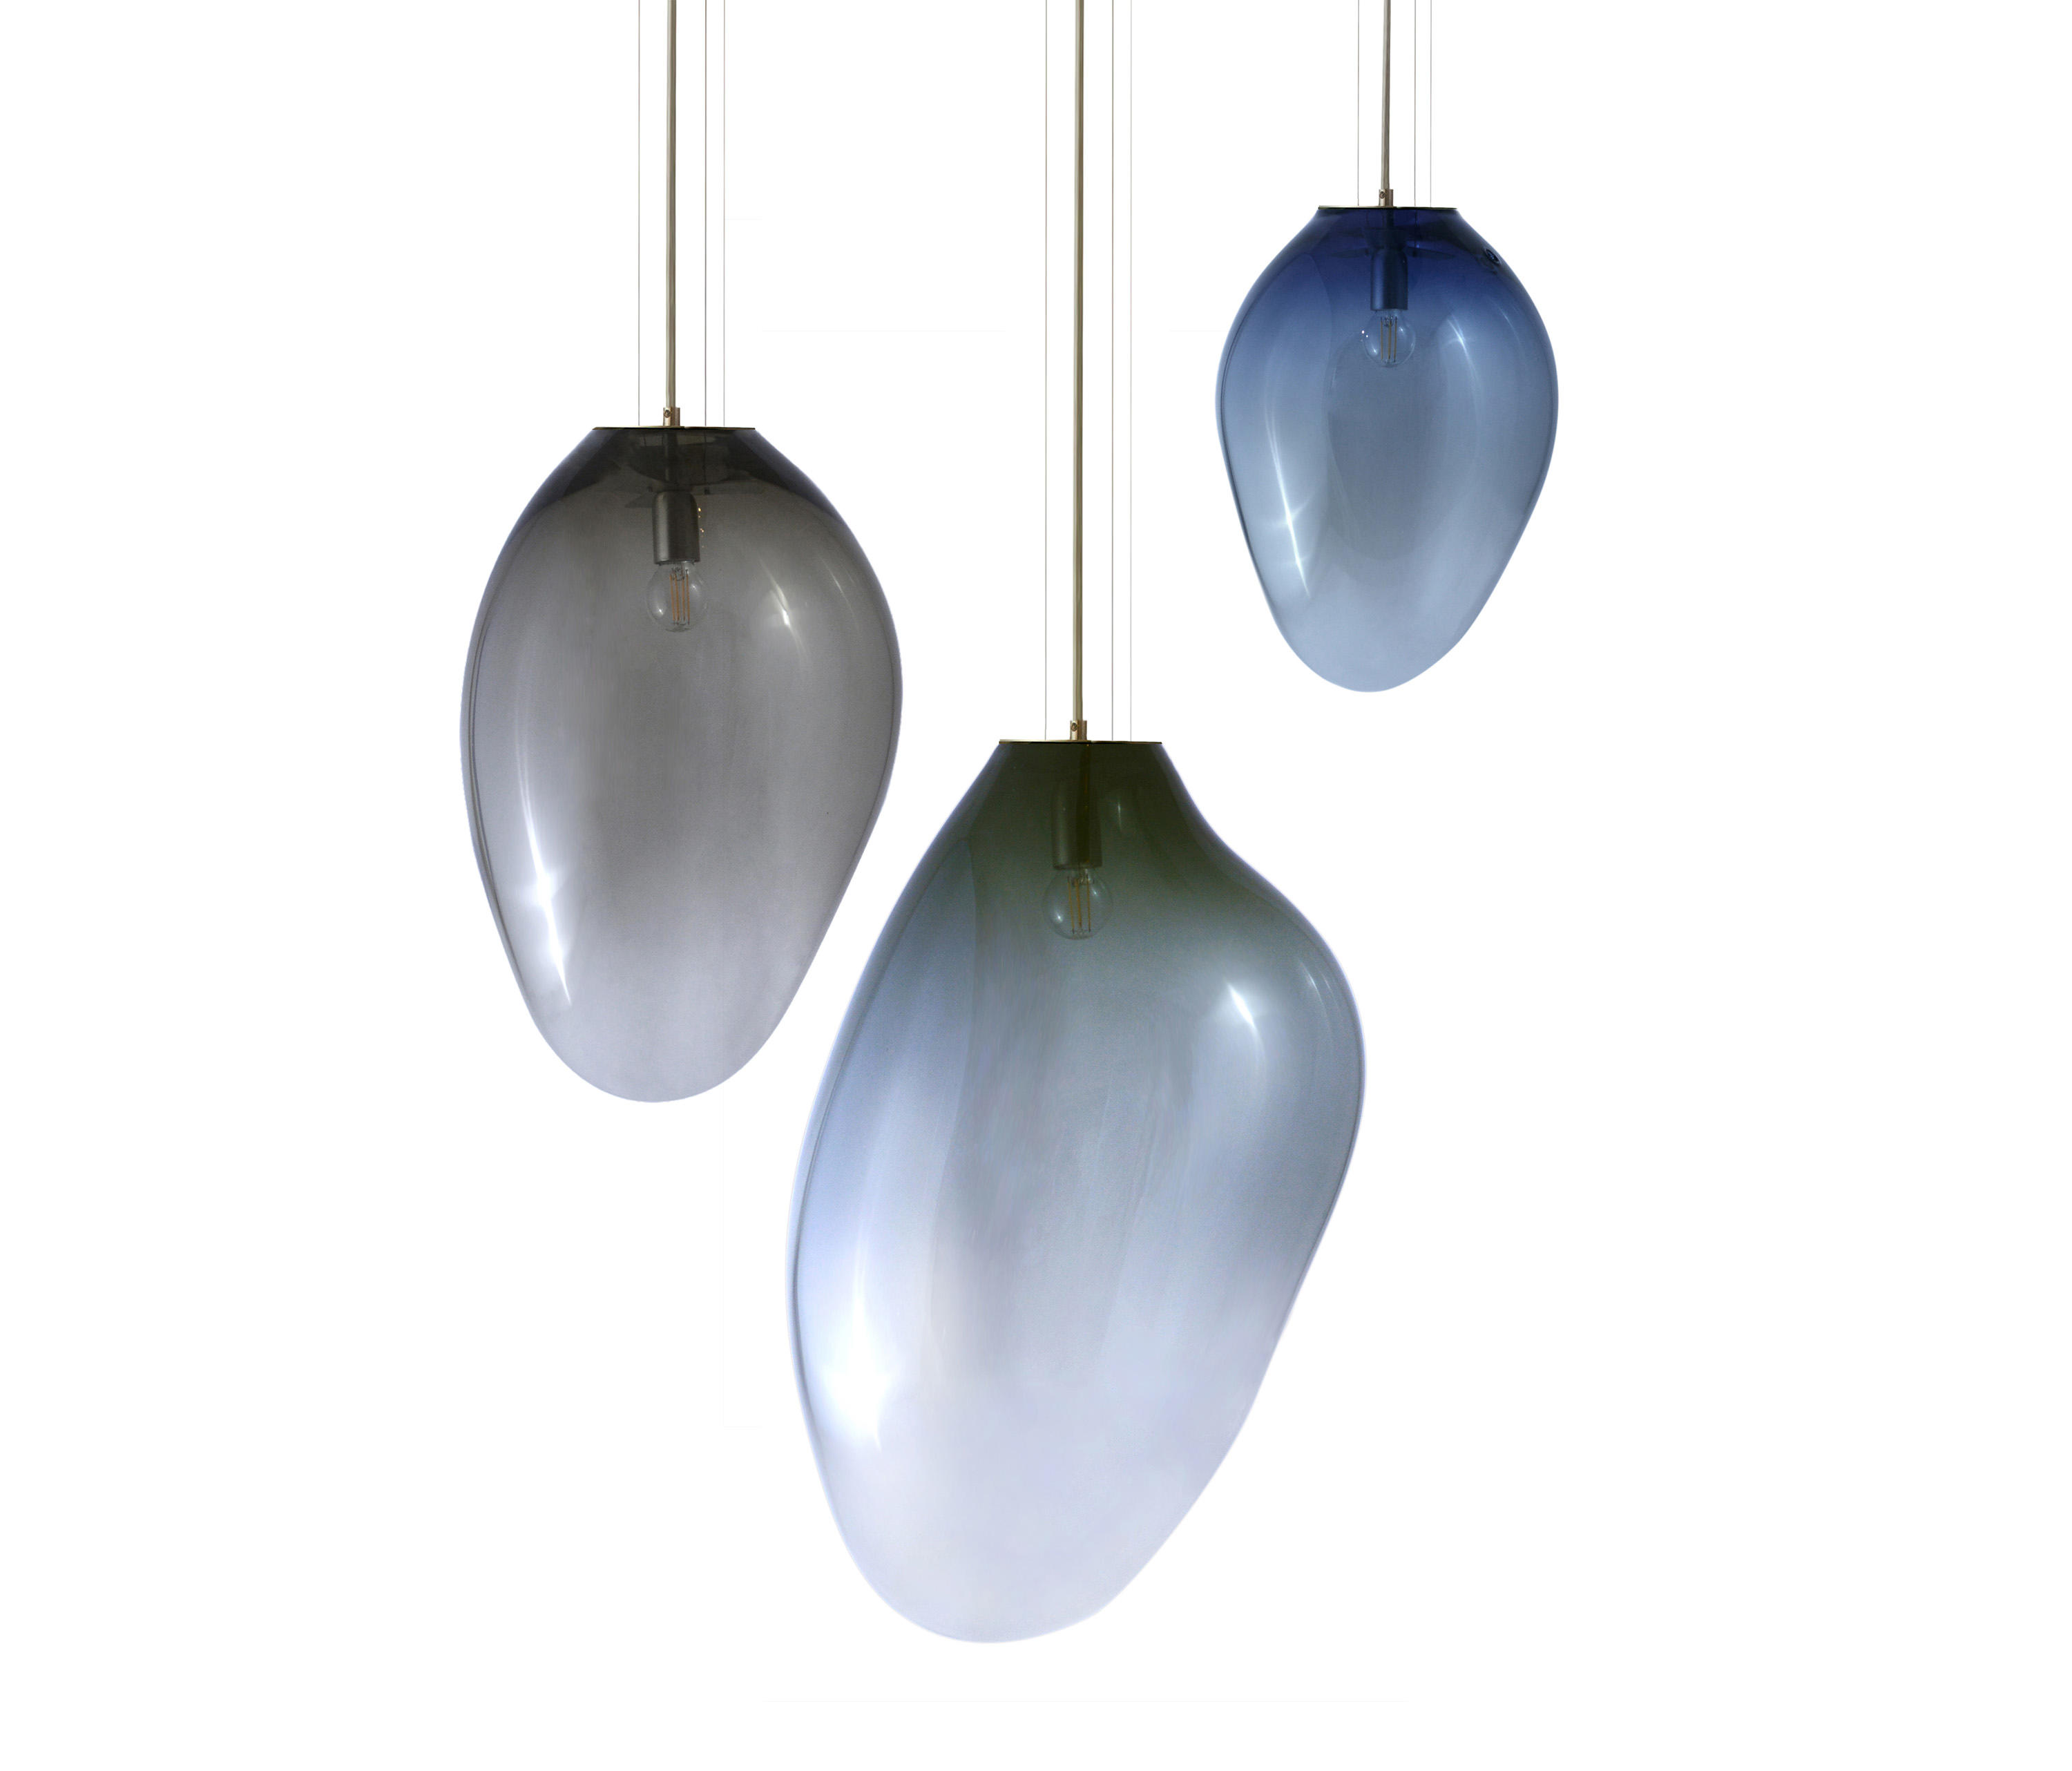 CERES - lights | ELOA Architonic from Suspended